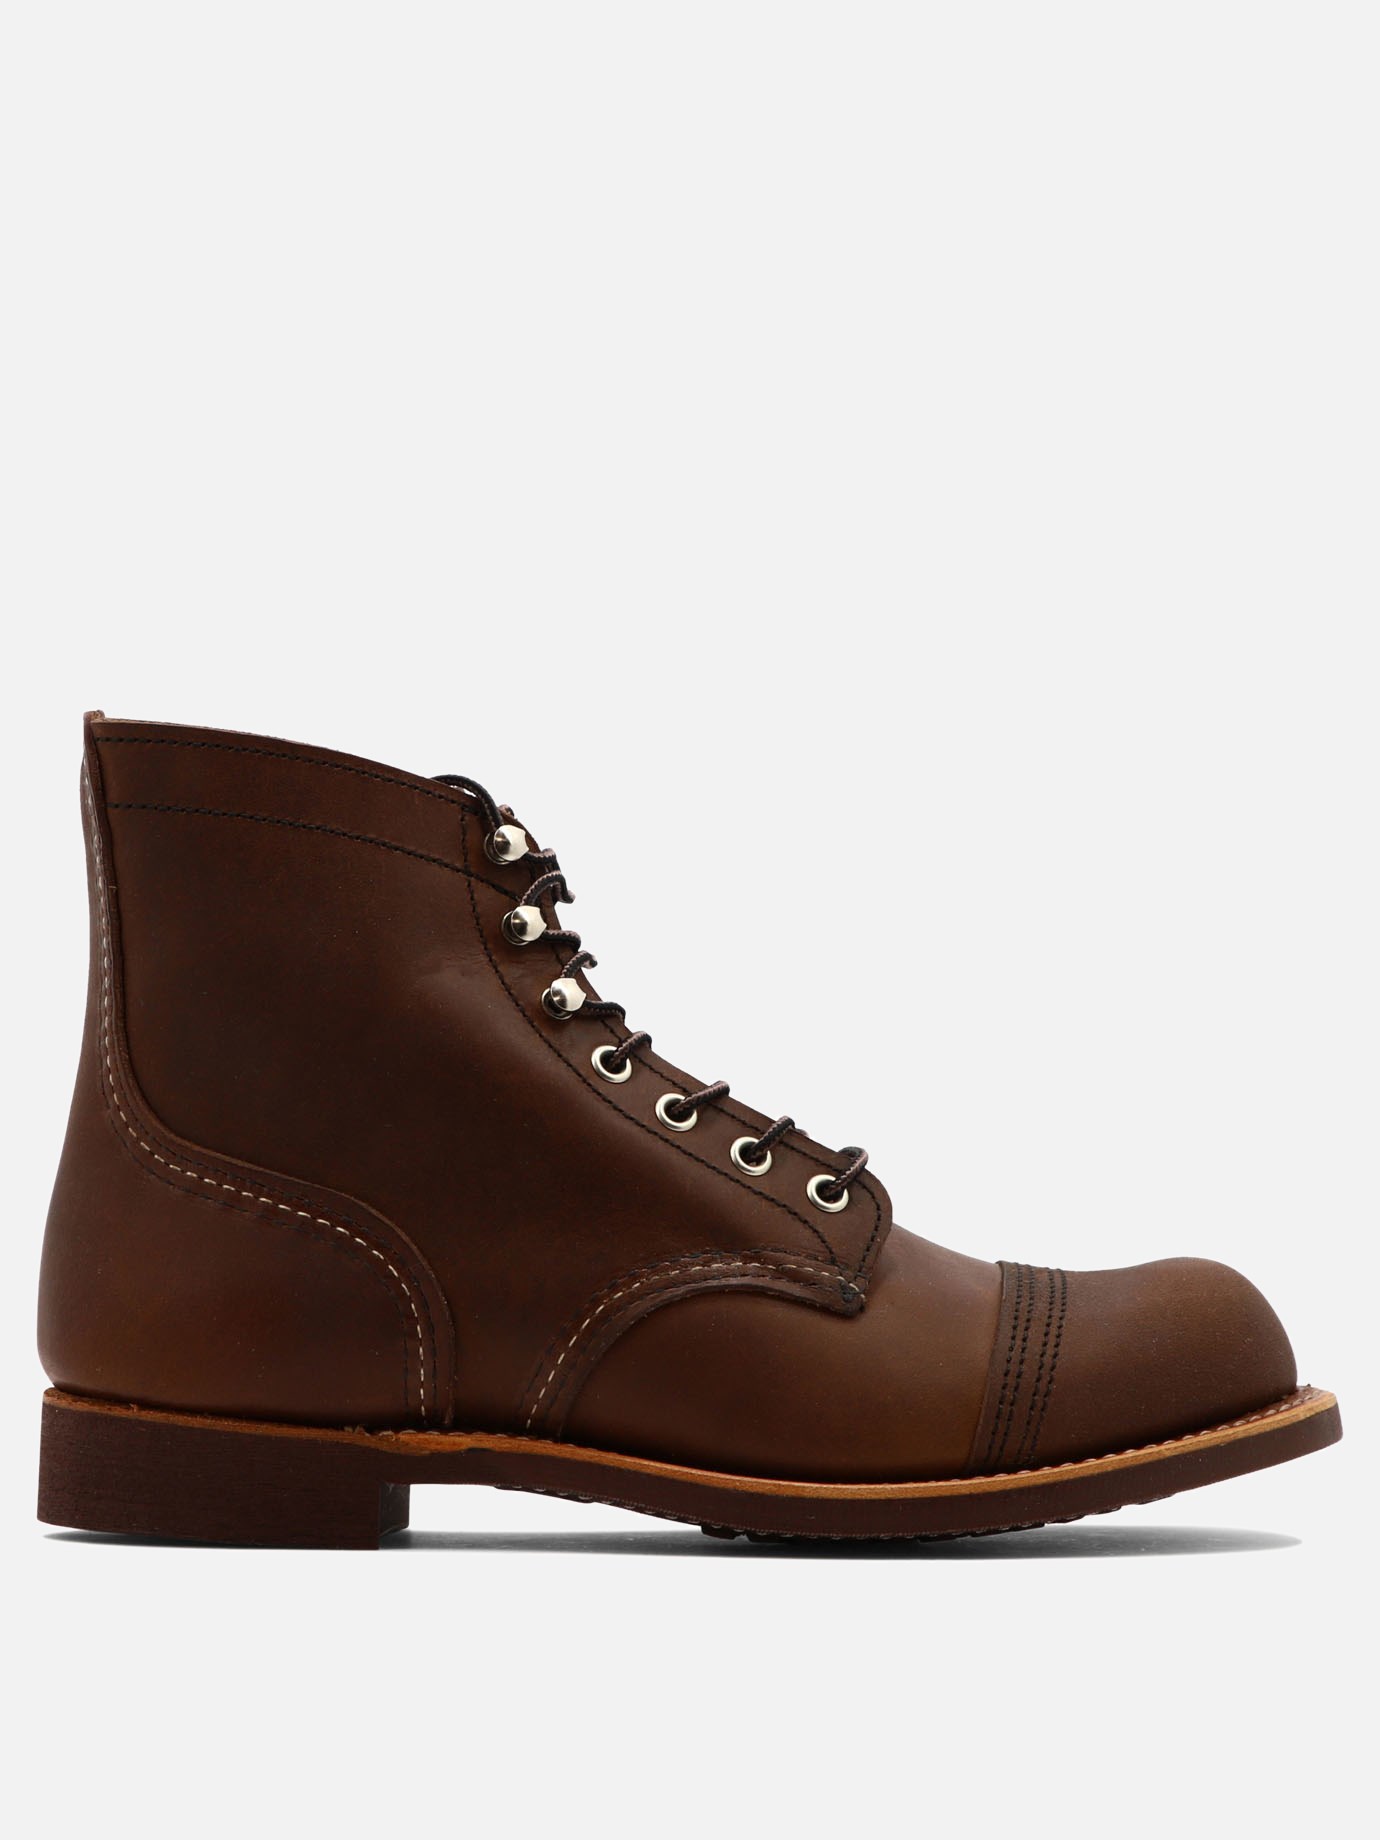  Iron Ranger  ankle bootsby Red Wing Shoes - 1